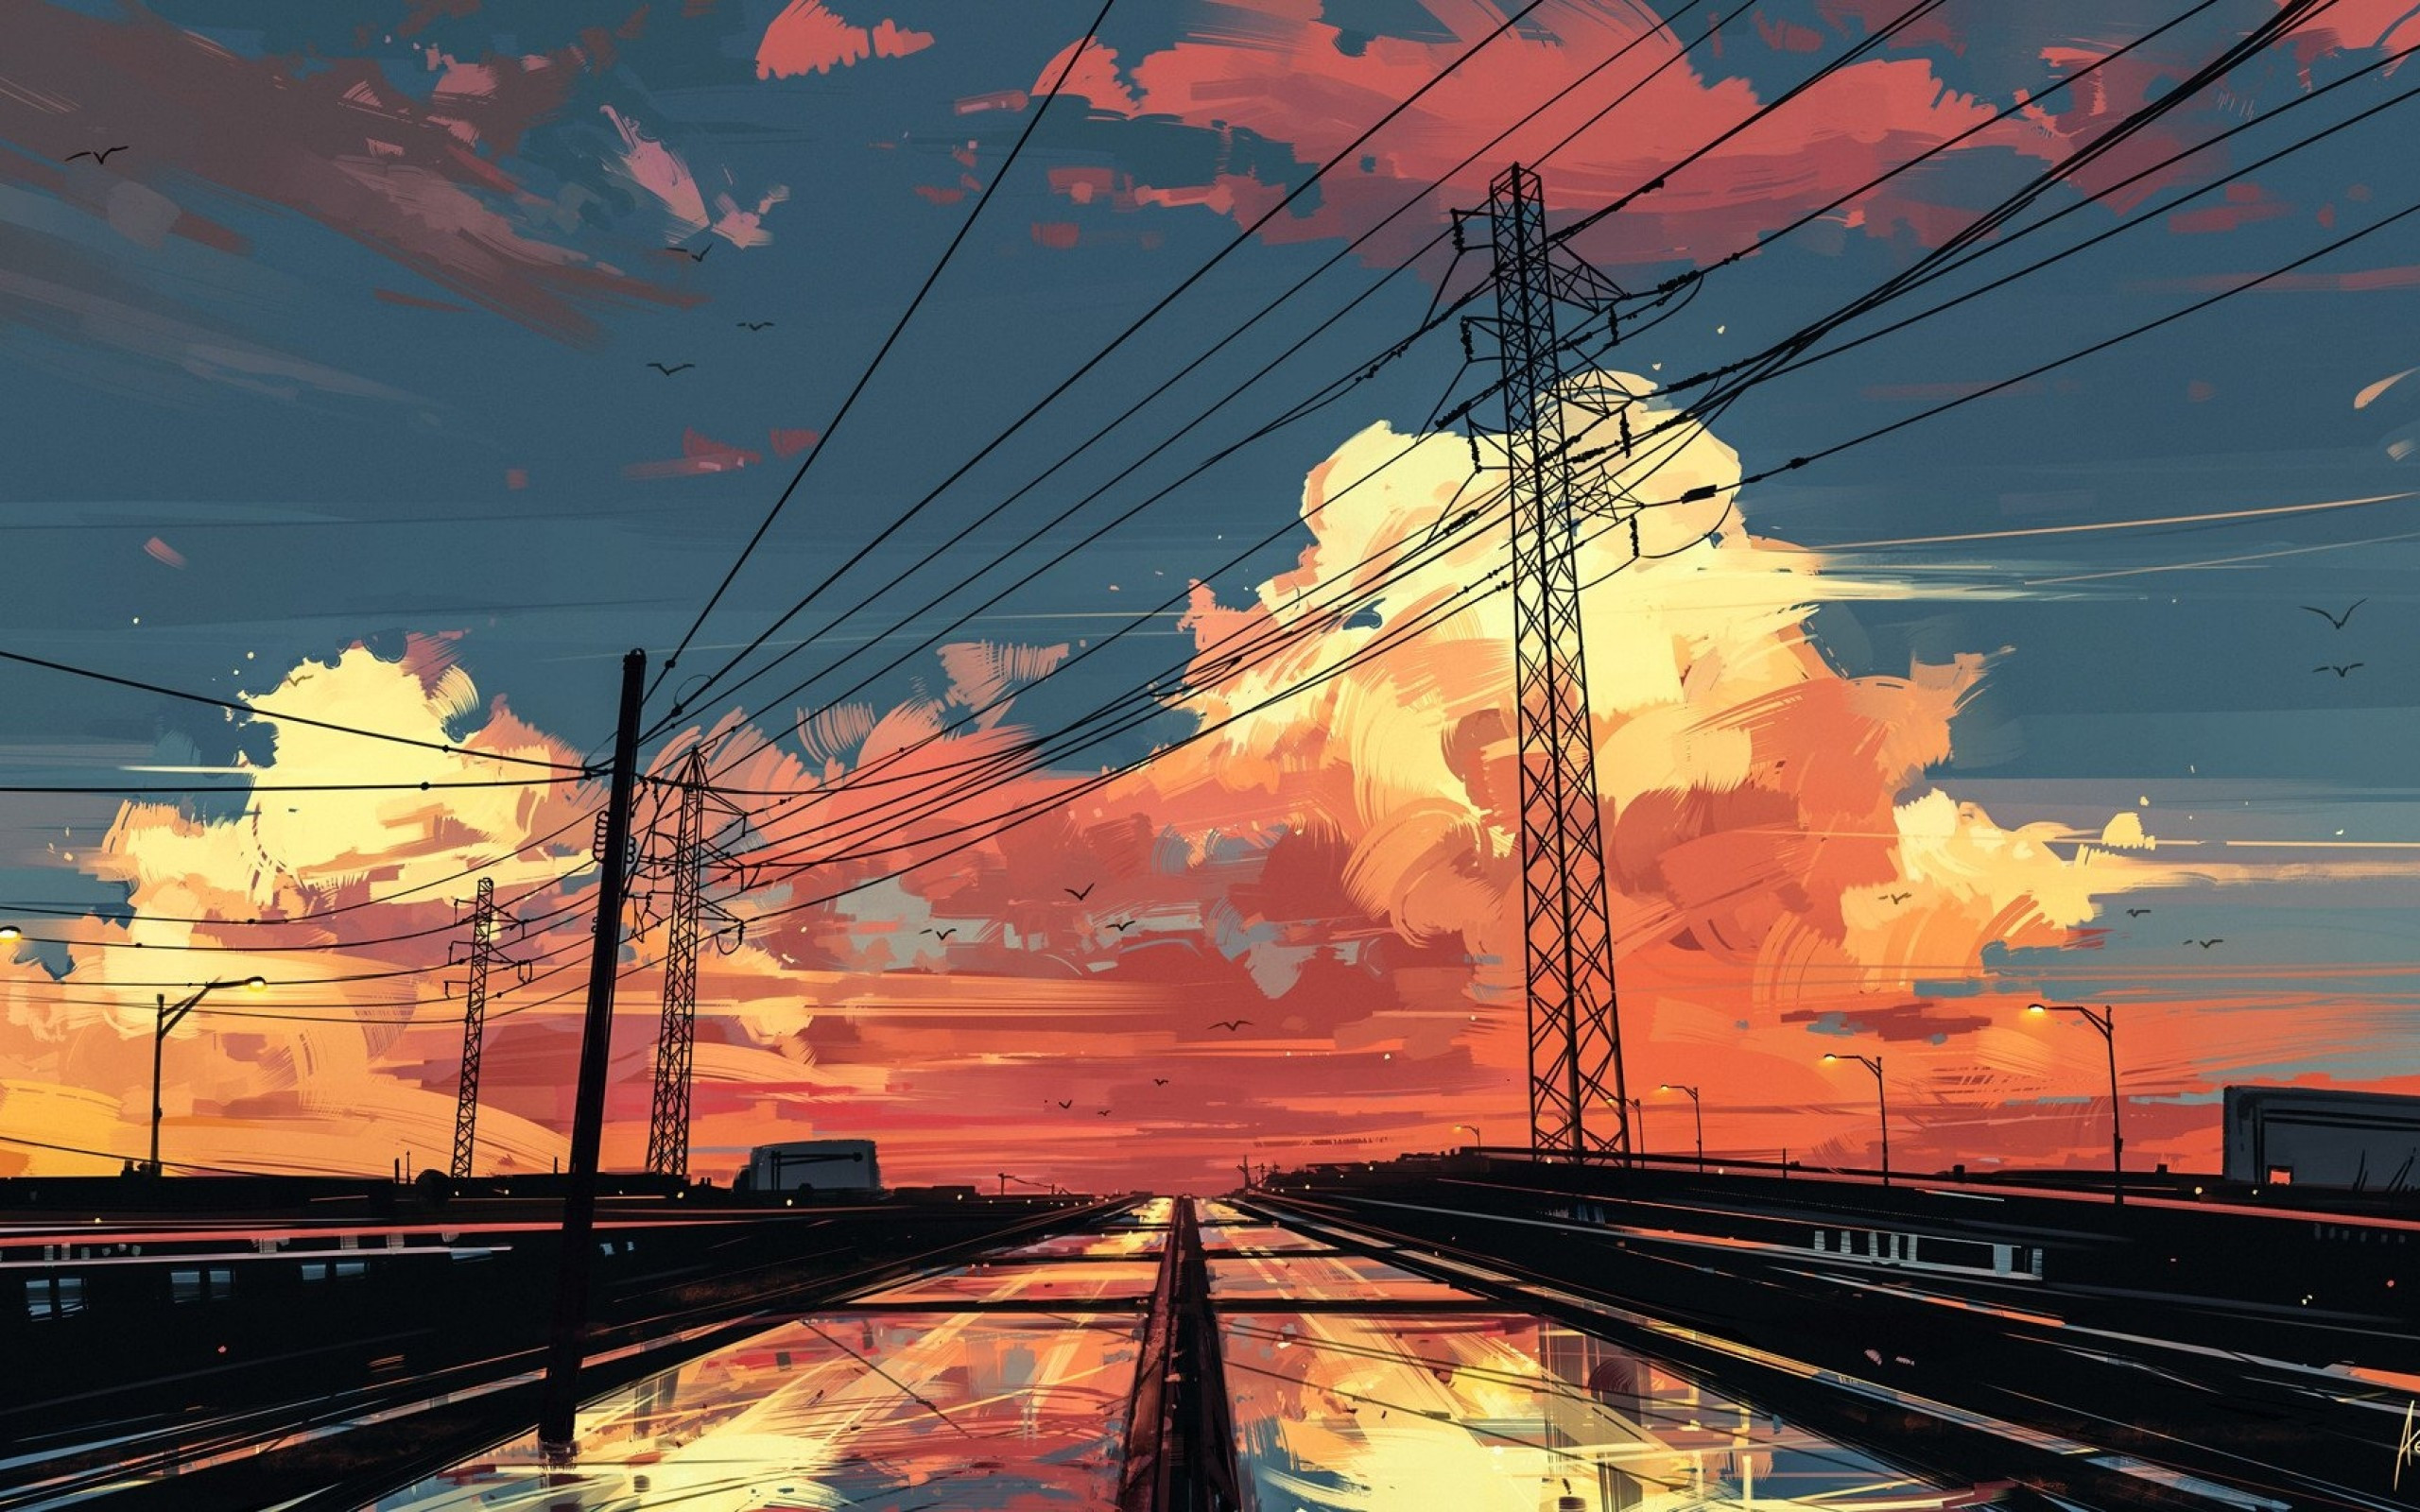 Download 2560x1600 Anime Landscape, Sunset, Sky, Painting, Scenic Wallpaper for MacBook Pro 13 inch